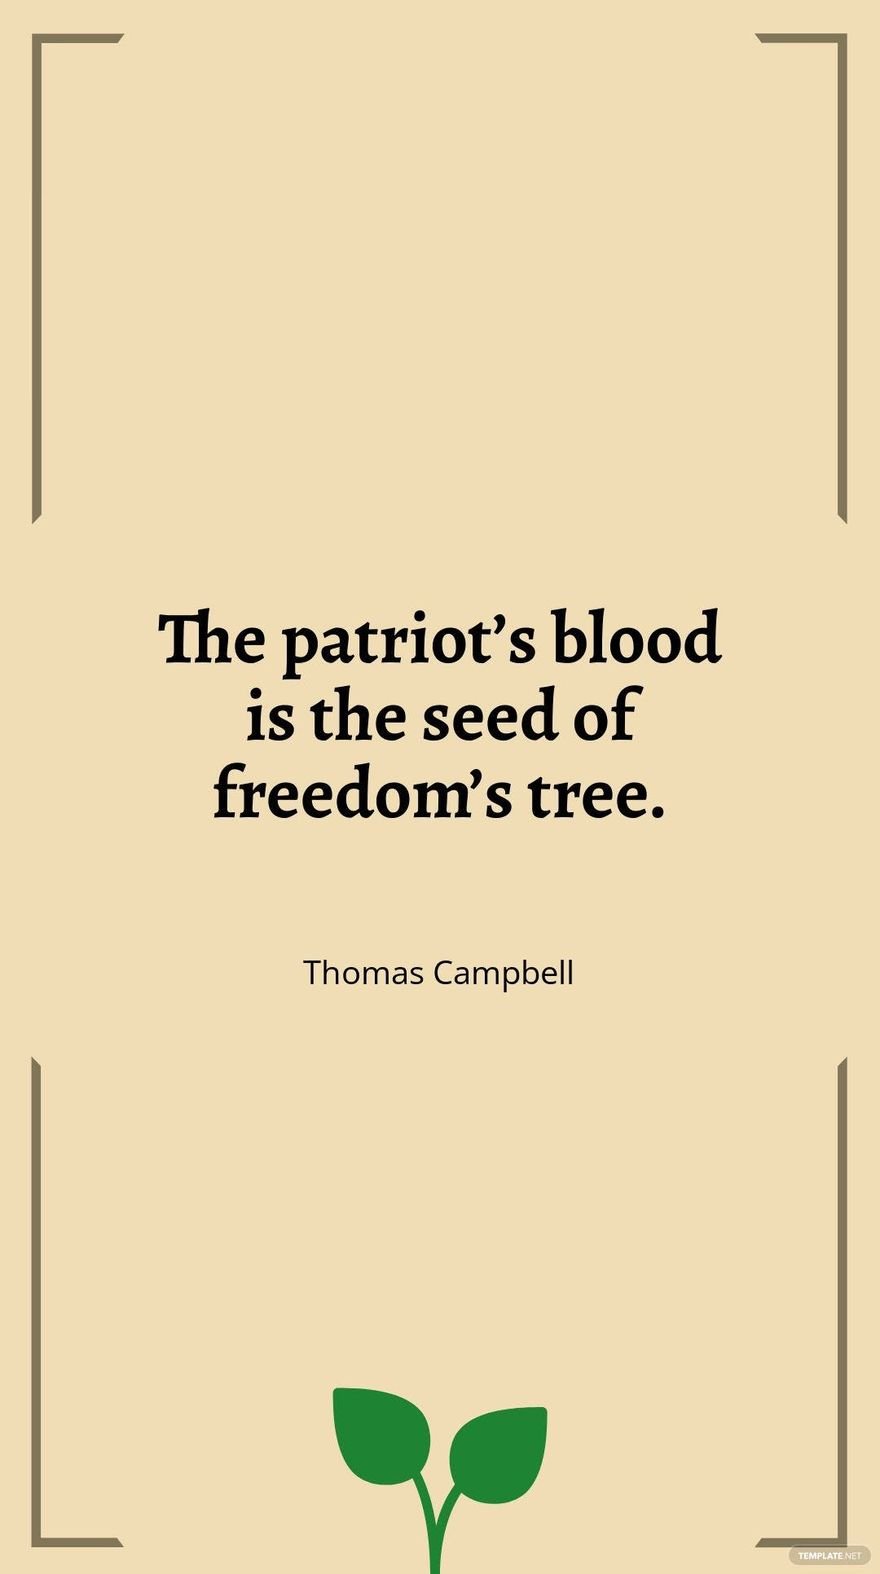 Free Thomas Campbell - “The patriot’s blood is the seed of freedom’s tree.” in JPG